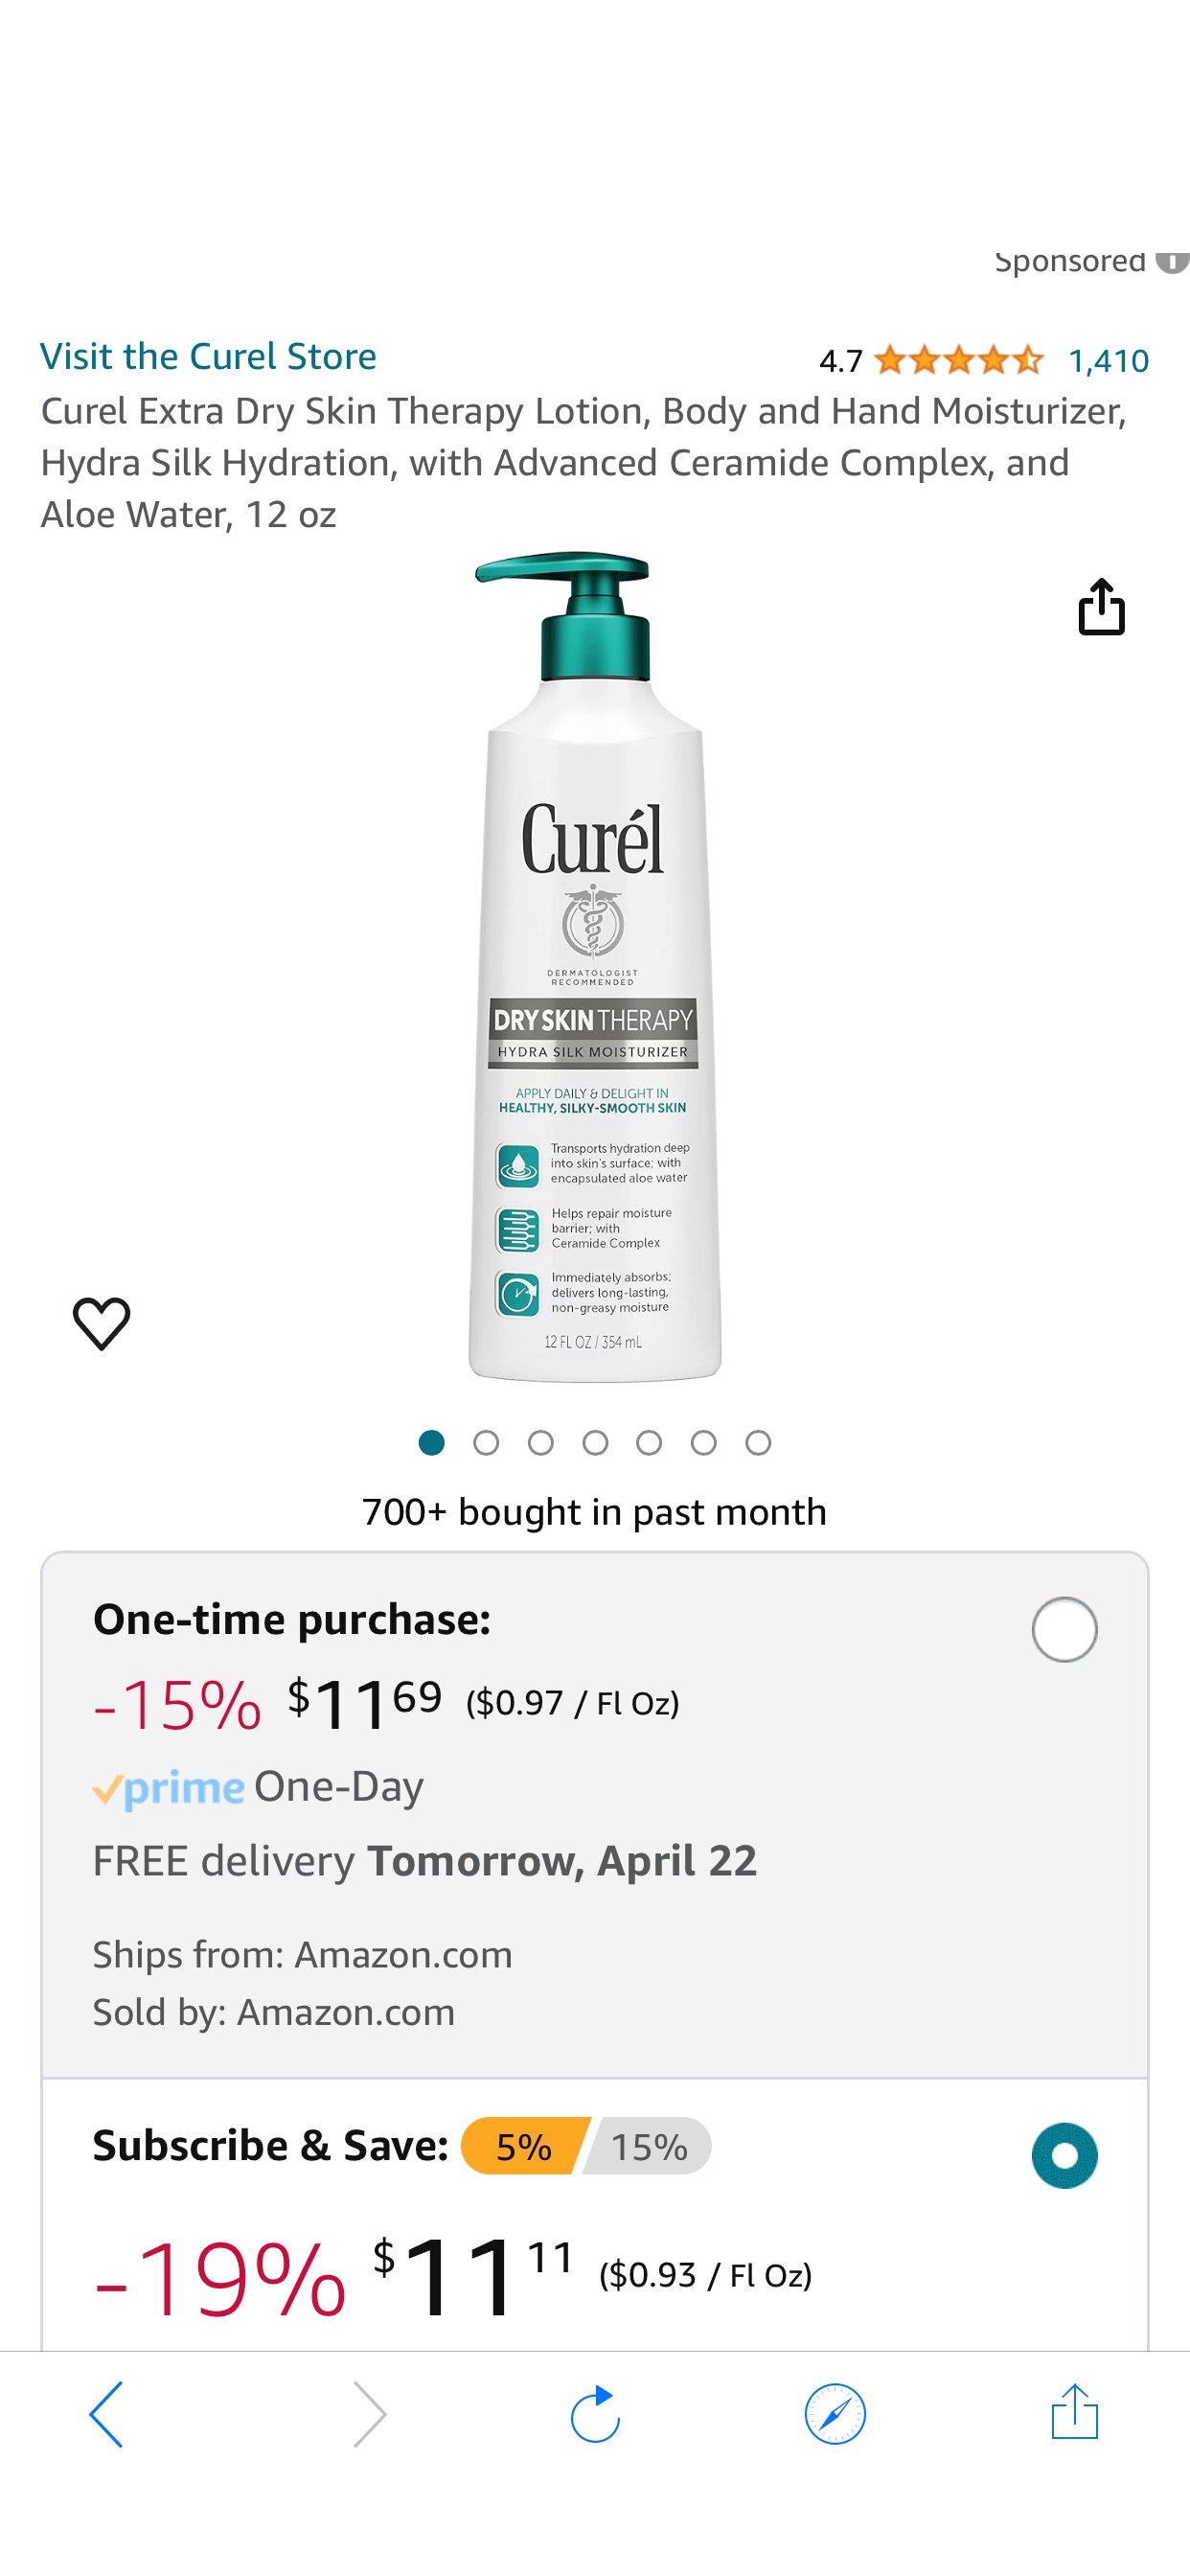 Amazon.com : Curel Extra Dry Skin Therapy Lotion, Body and Hand Moisturizer, Hydra Silk Hydration, with Advanced Ceramide Complex, and Aloe Water, 12 oz : Beauty & Personal Care 珂润润肤霜